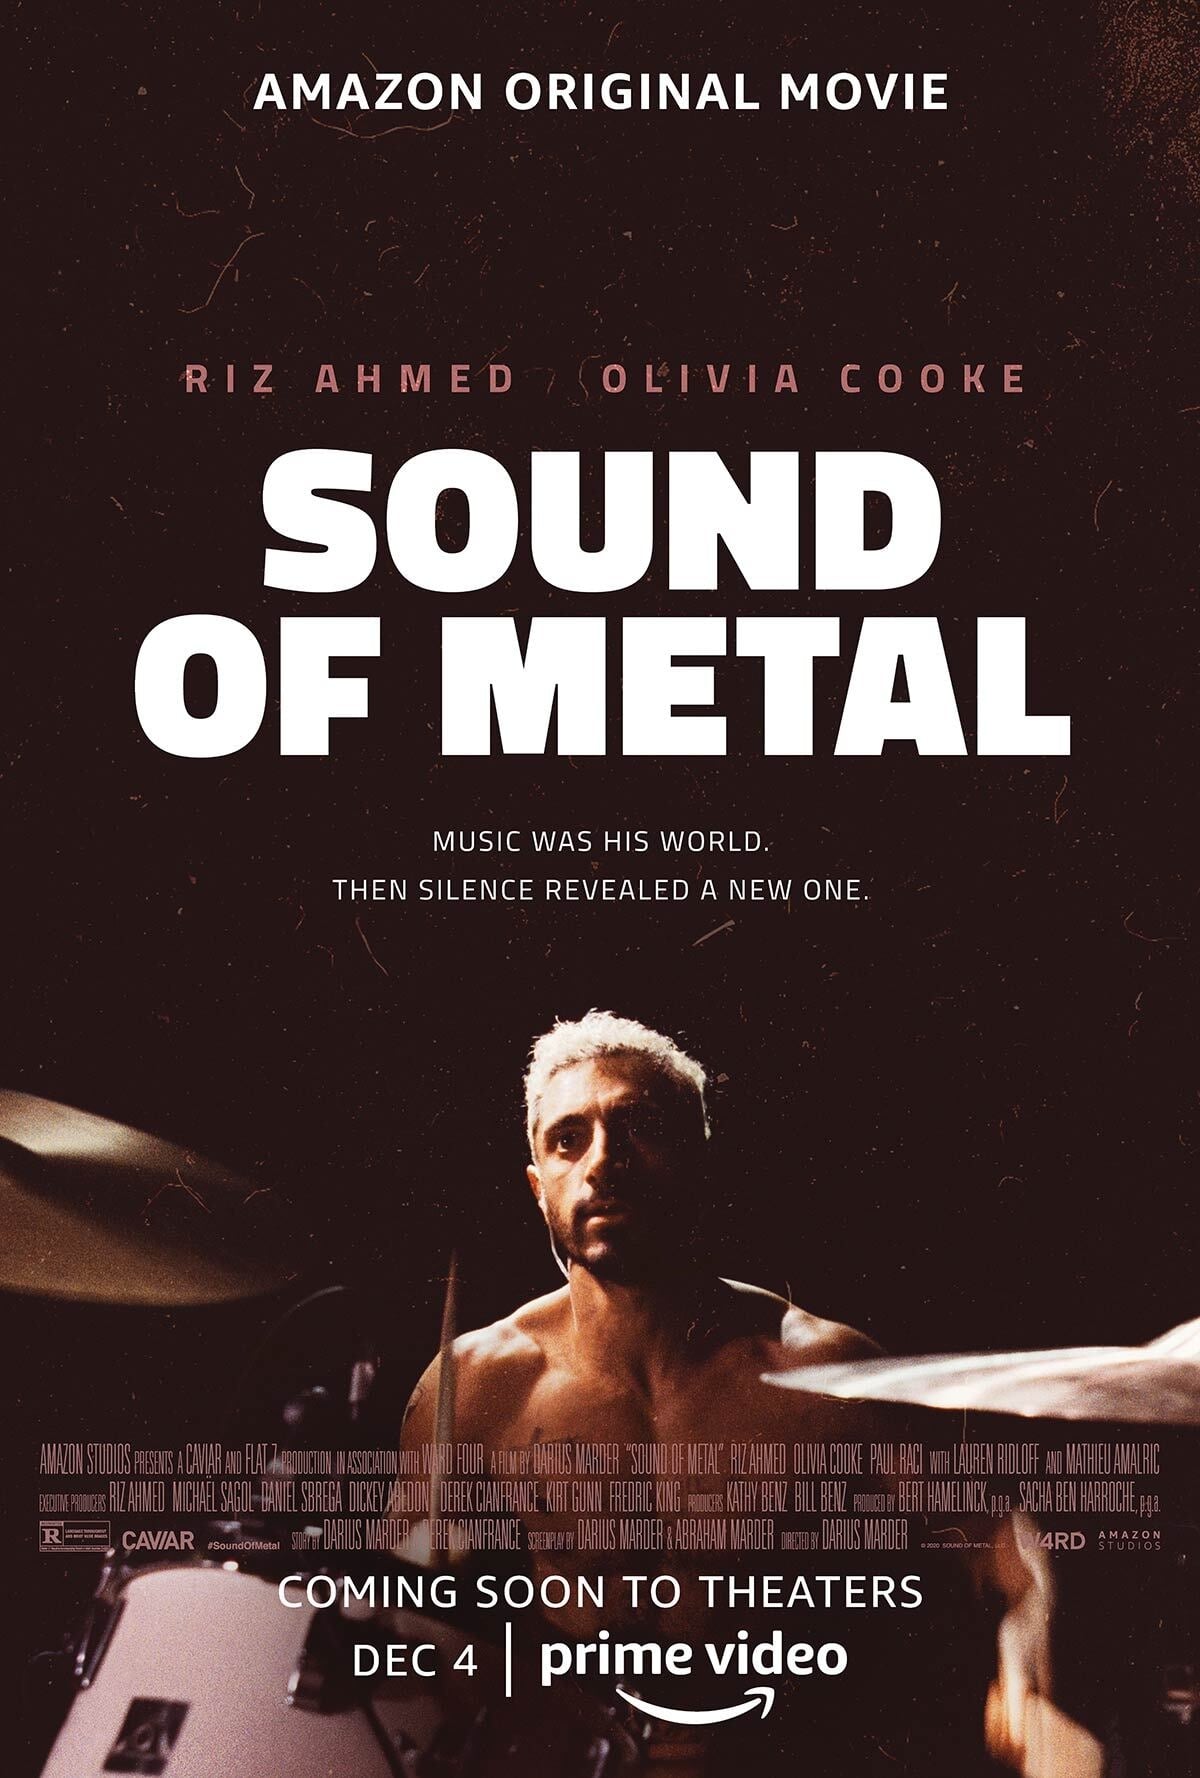 Metal drummer Ruben begins to lose his hearing. When a doctor tells him his condition will worsen, he thinks his career and life is over. His girlfriend Lou checks the former addict into a rehab for the deaf hoping it will prevent a relapse and help him adapt to his new life. After being welcomed and accepted just as he is, Ruben must choose between his new normal and the life he once knew.